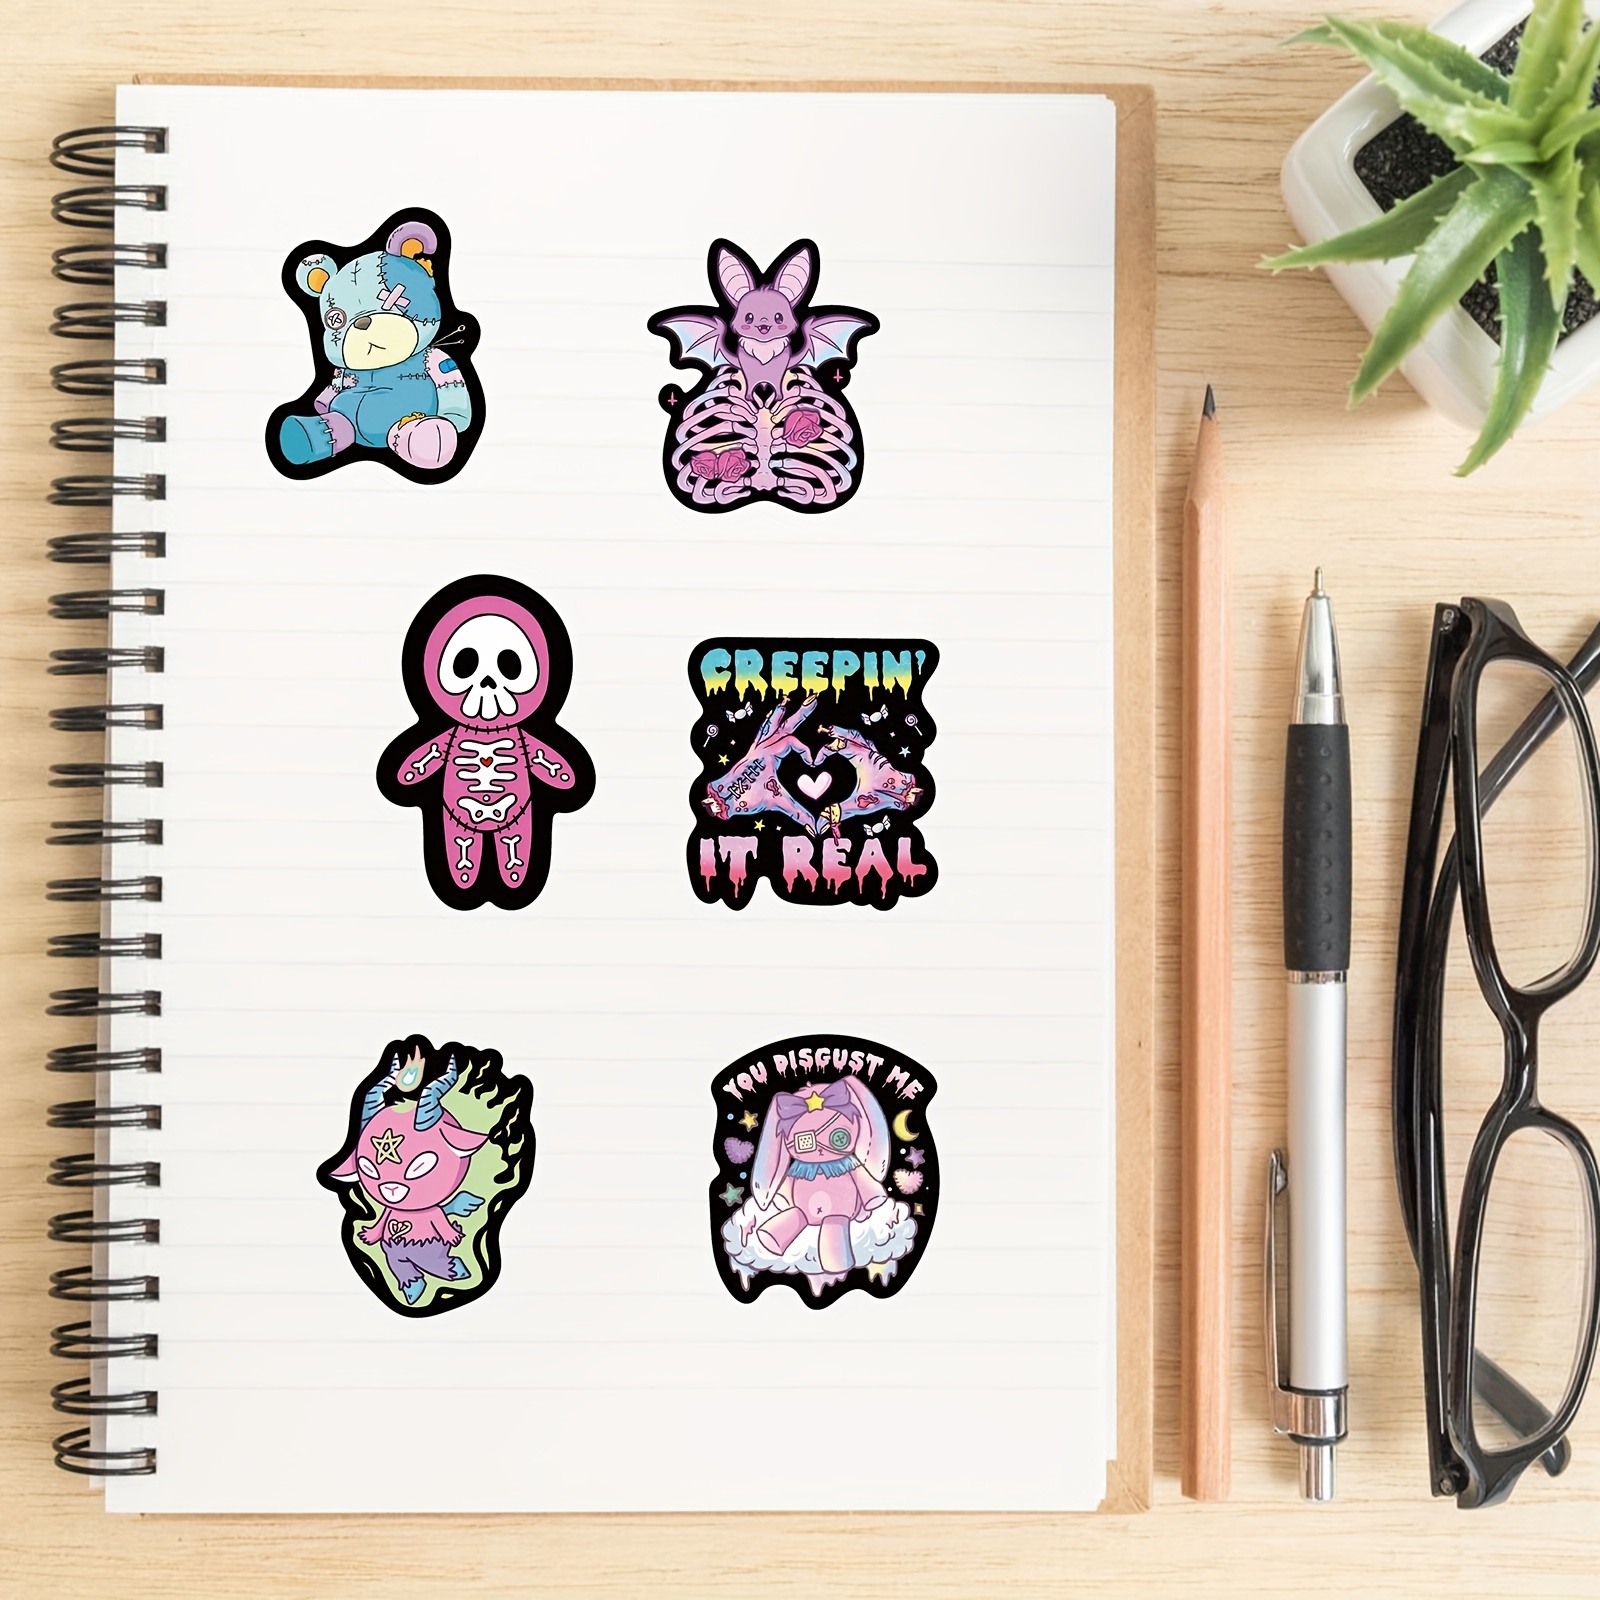 Gothic Stickers, 50 Pcs Goth Vinyl Sticker Pack, Waterproof Skeleton  Stickers for Laptops, Water Bottles, Phone Case, Skull Stickers Decals for  Teens and Adults 